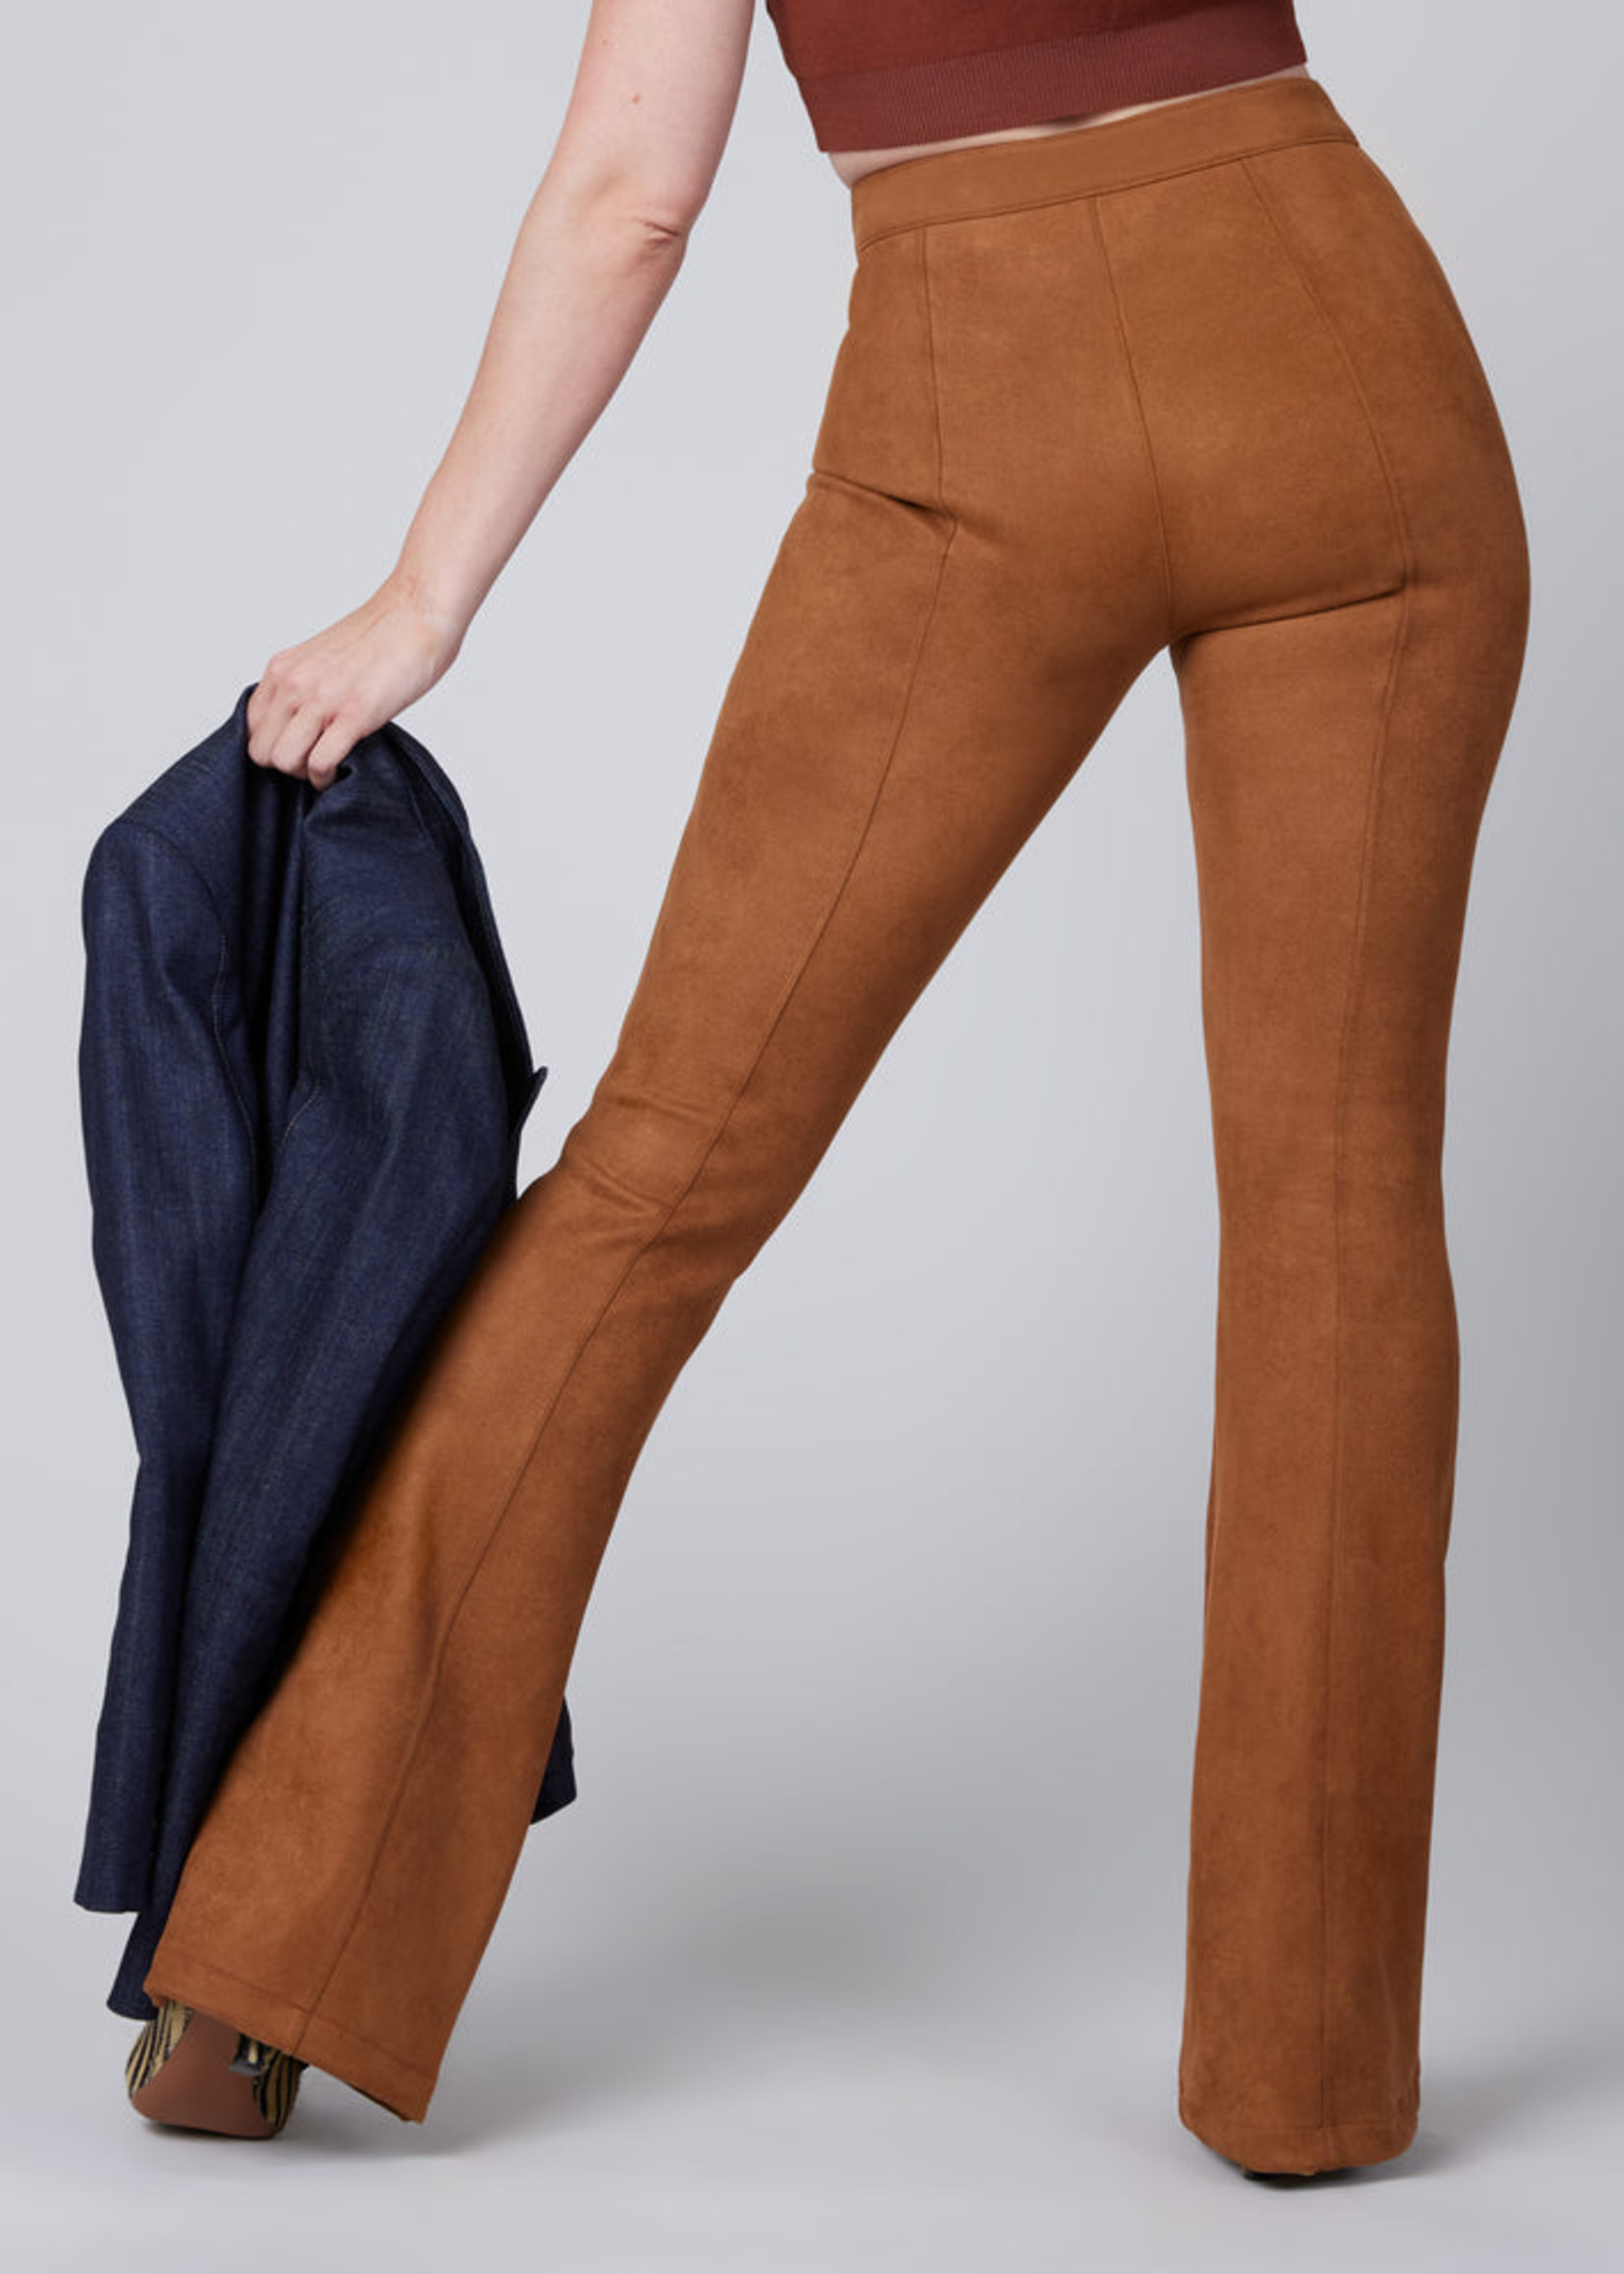 Spanx Faux Suede Flare Pant